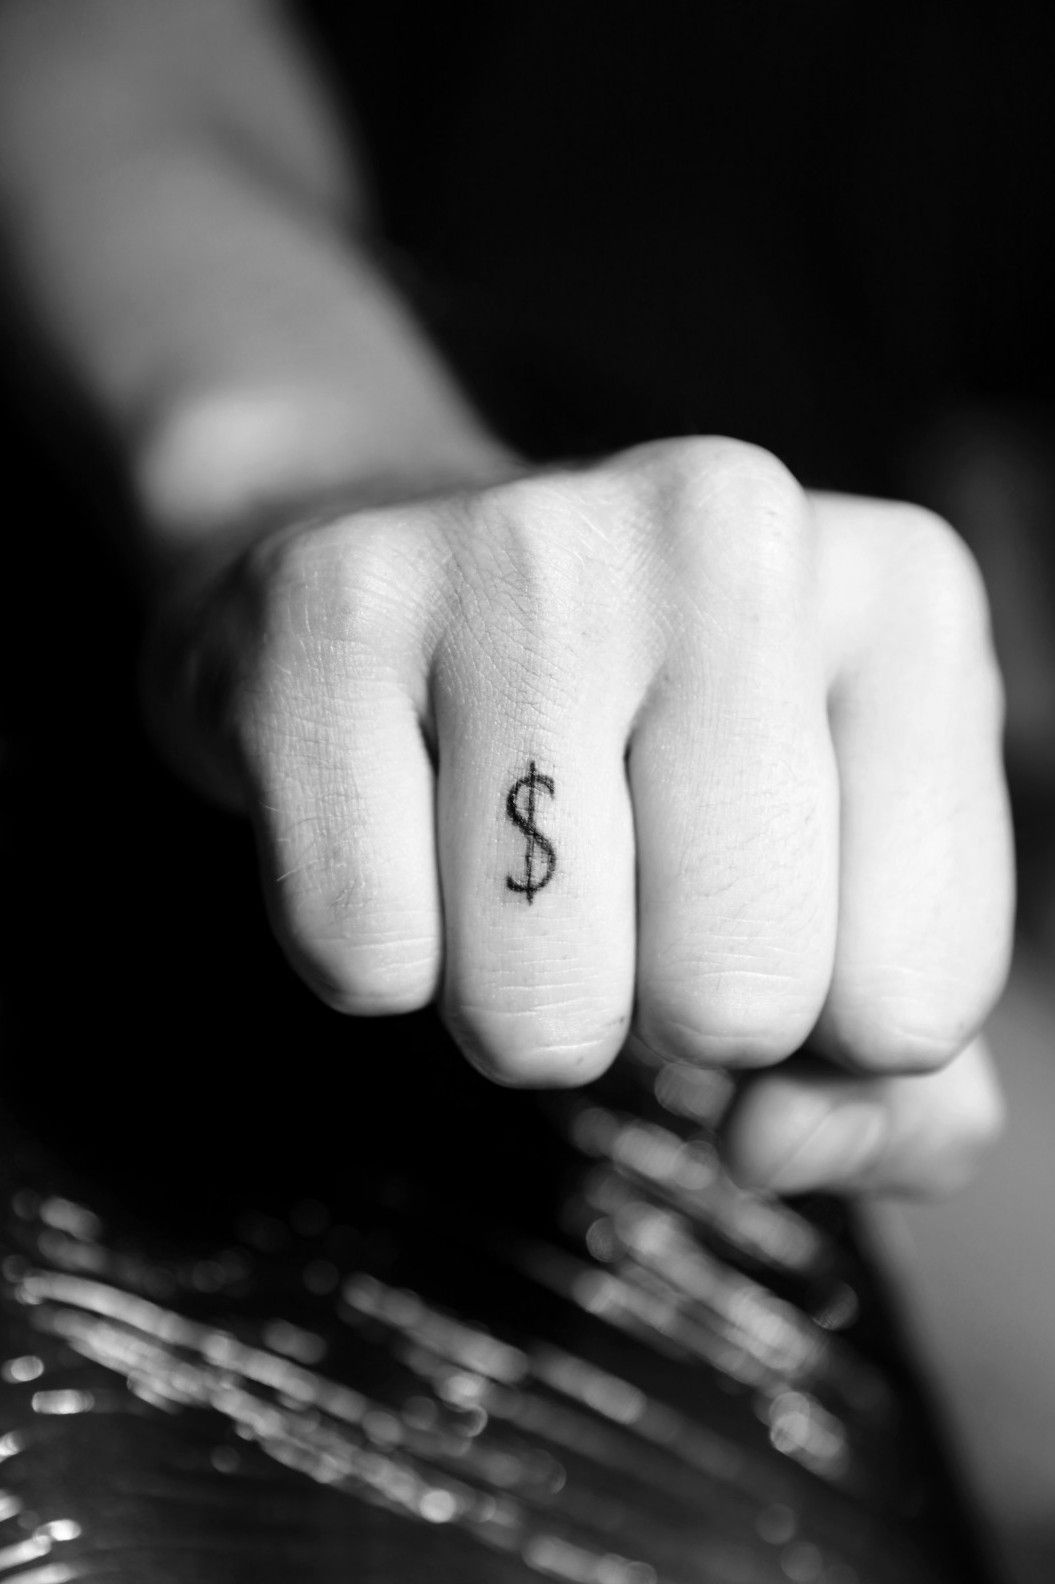 Rate This Small Dollar Sign Tattoo 1 to 100  Dollar sign tattoo Money  sign tattoo Dollar tattoo